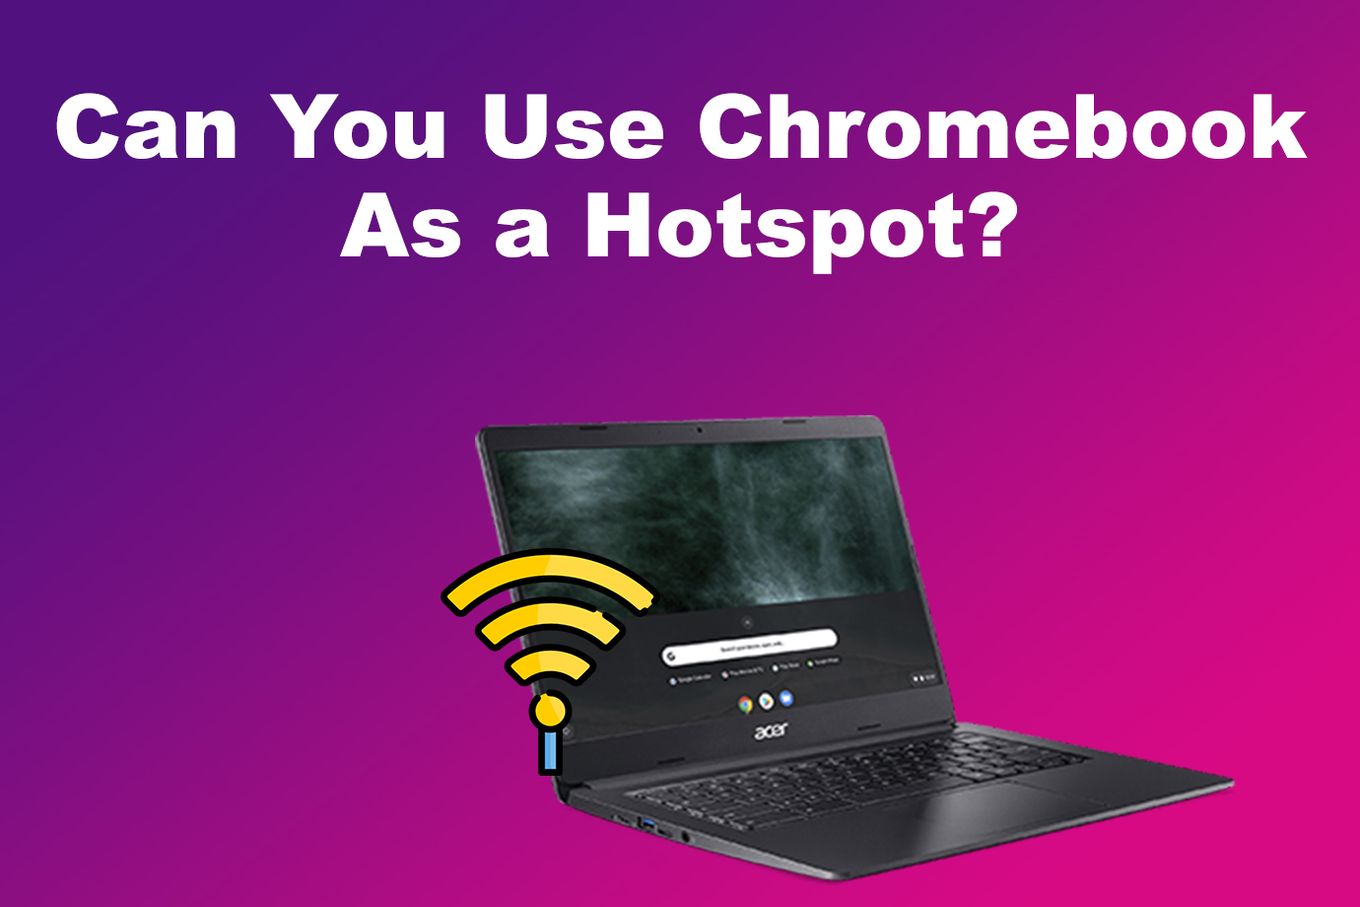 Can You Use a Chromebook As a Hotspot?